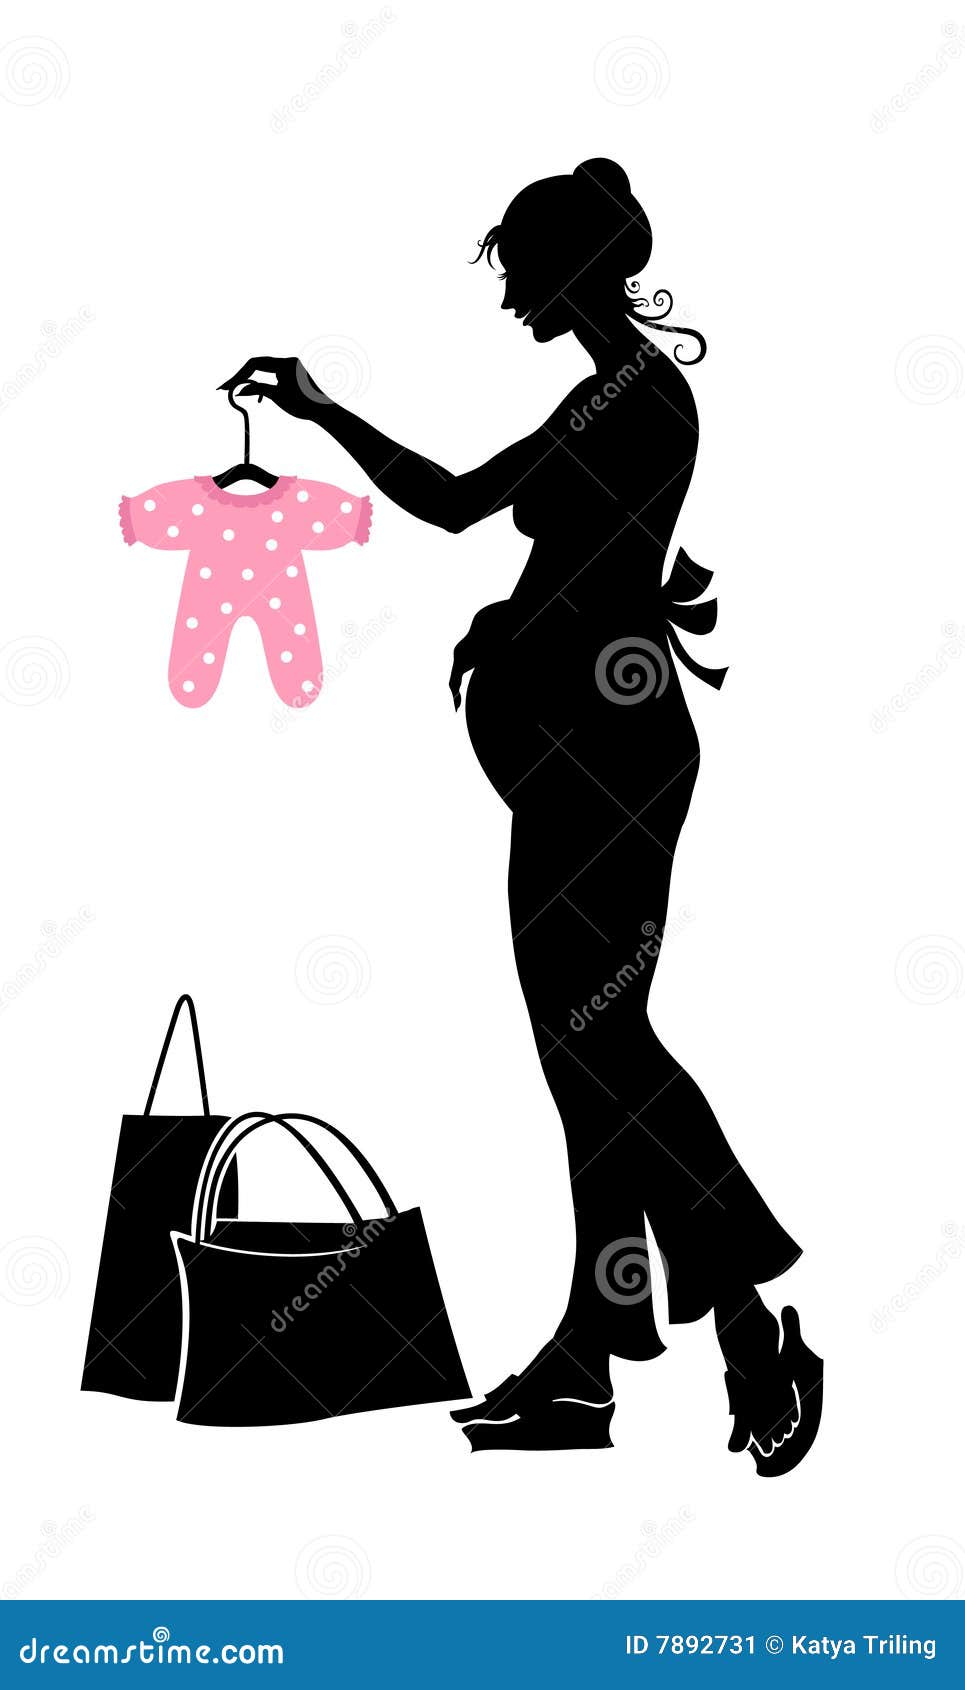 Pregnant woman stock vector. Illustration of child, happiness - 7892731